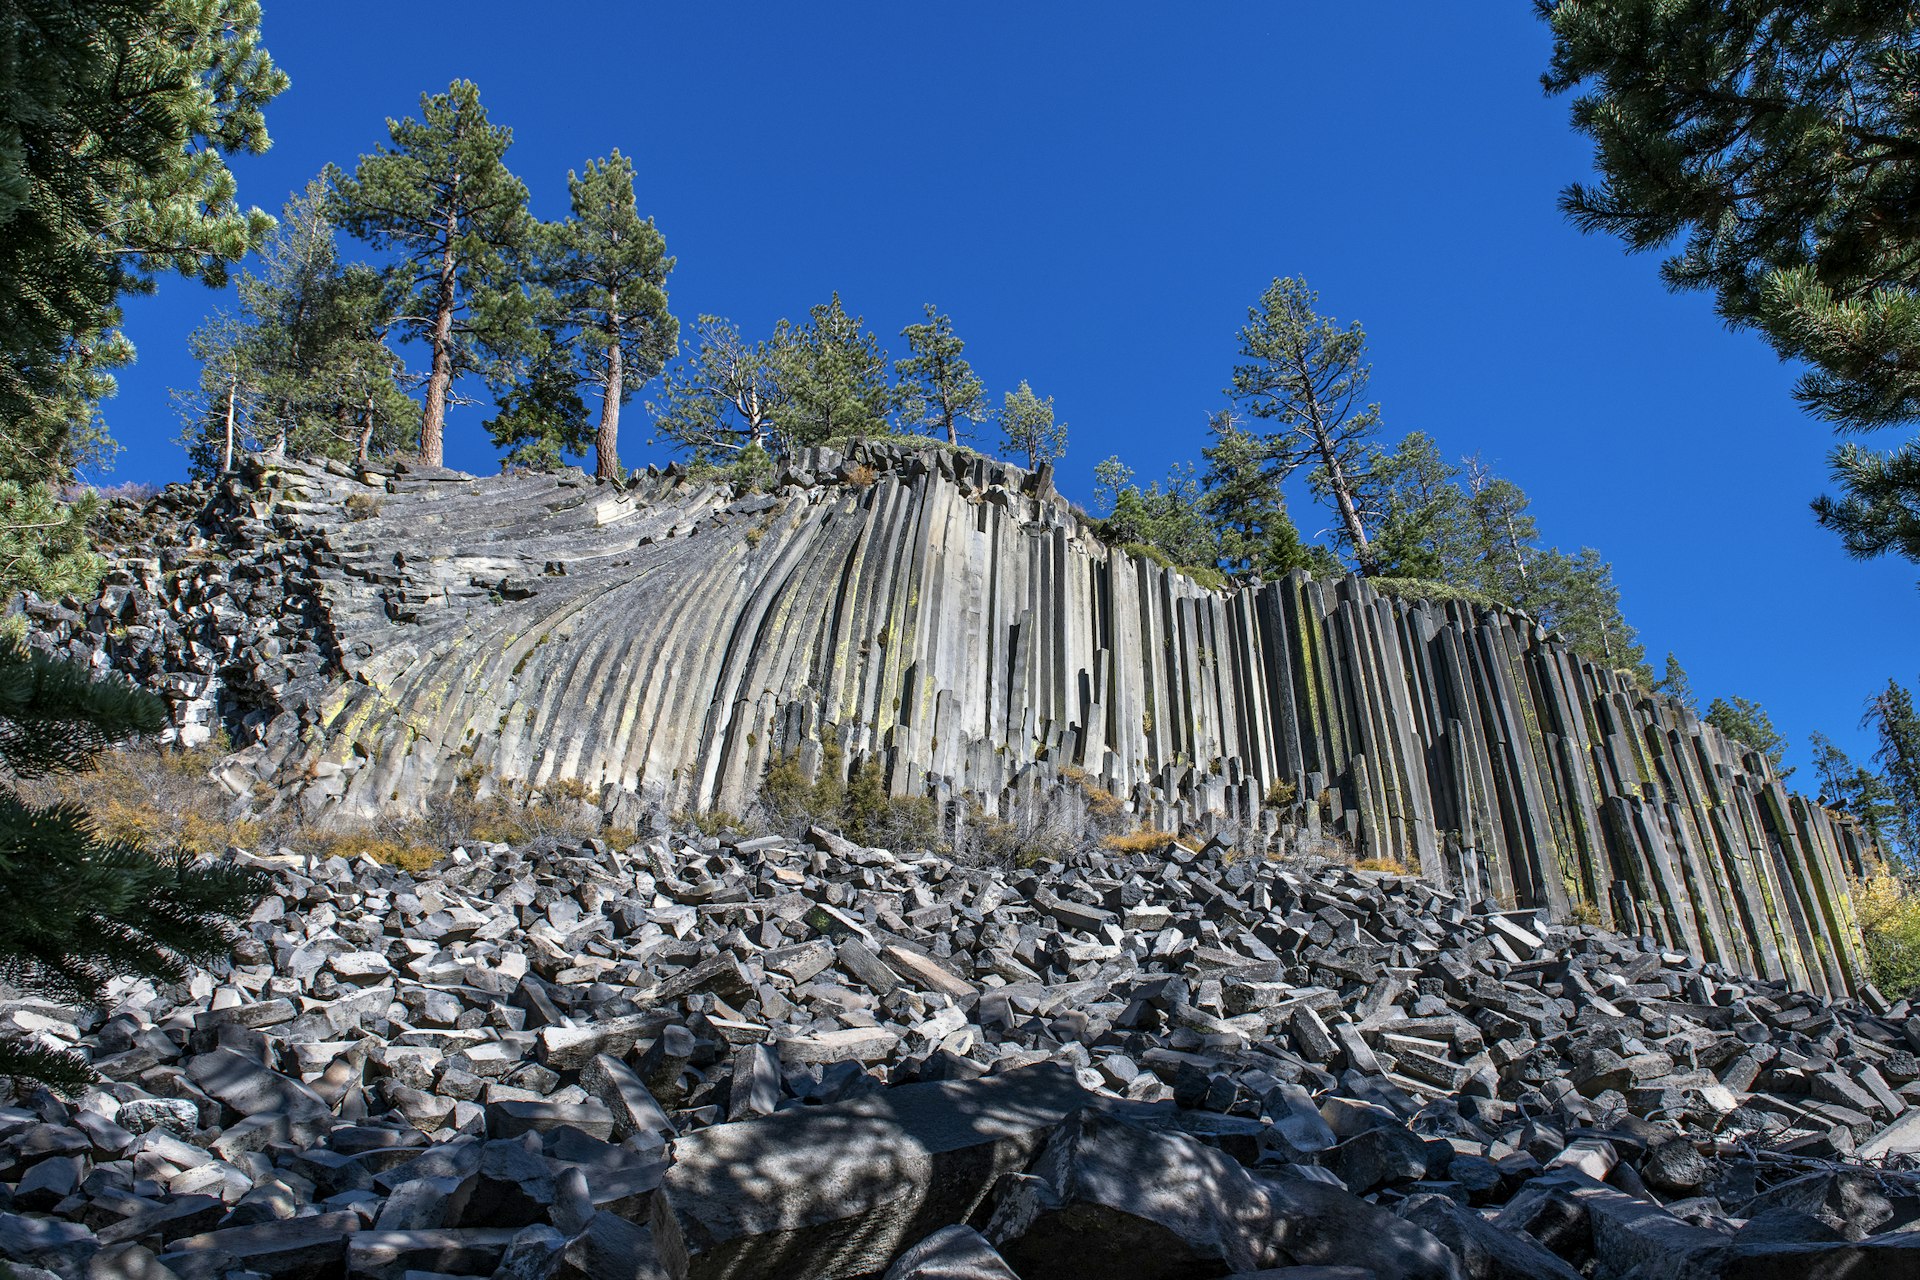 A cliff-face of basalt columns rises up from the rock-strewn ground at Devils Postpile National Monument